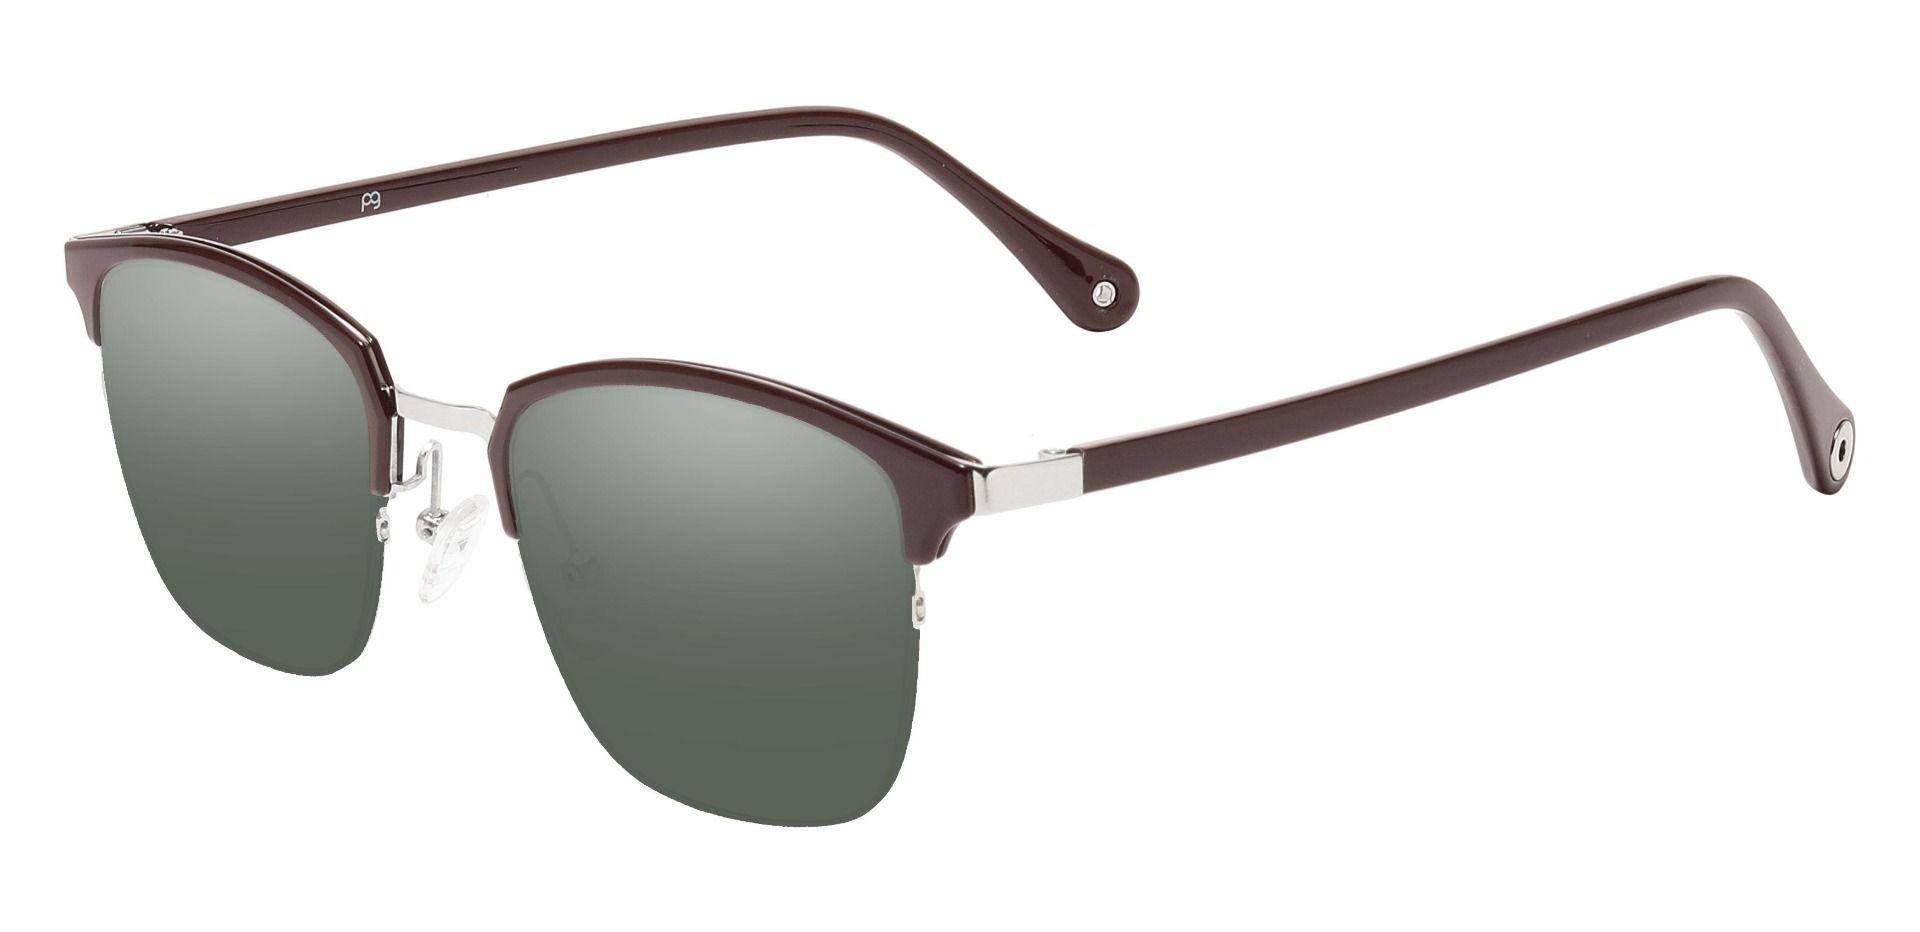 Atlantic Browline Reading Sunglasses - Brown Frame With Green Lenses